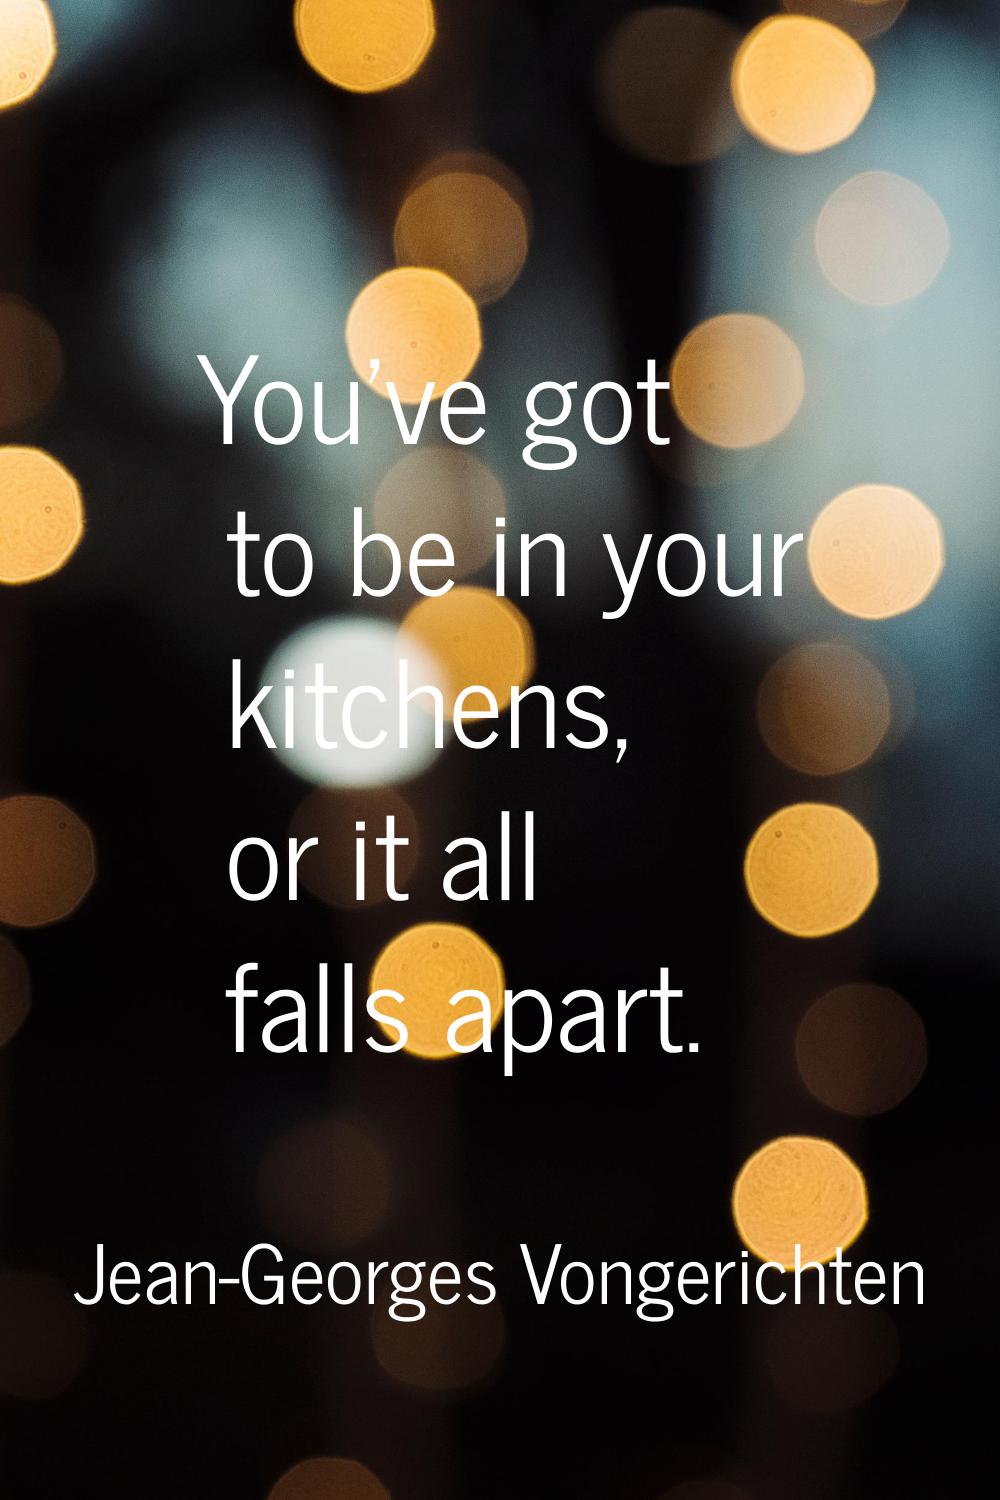 You've got to be in your kitchens, or it all falls apart.